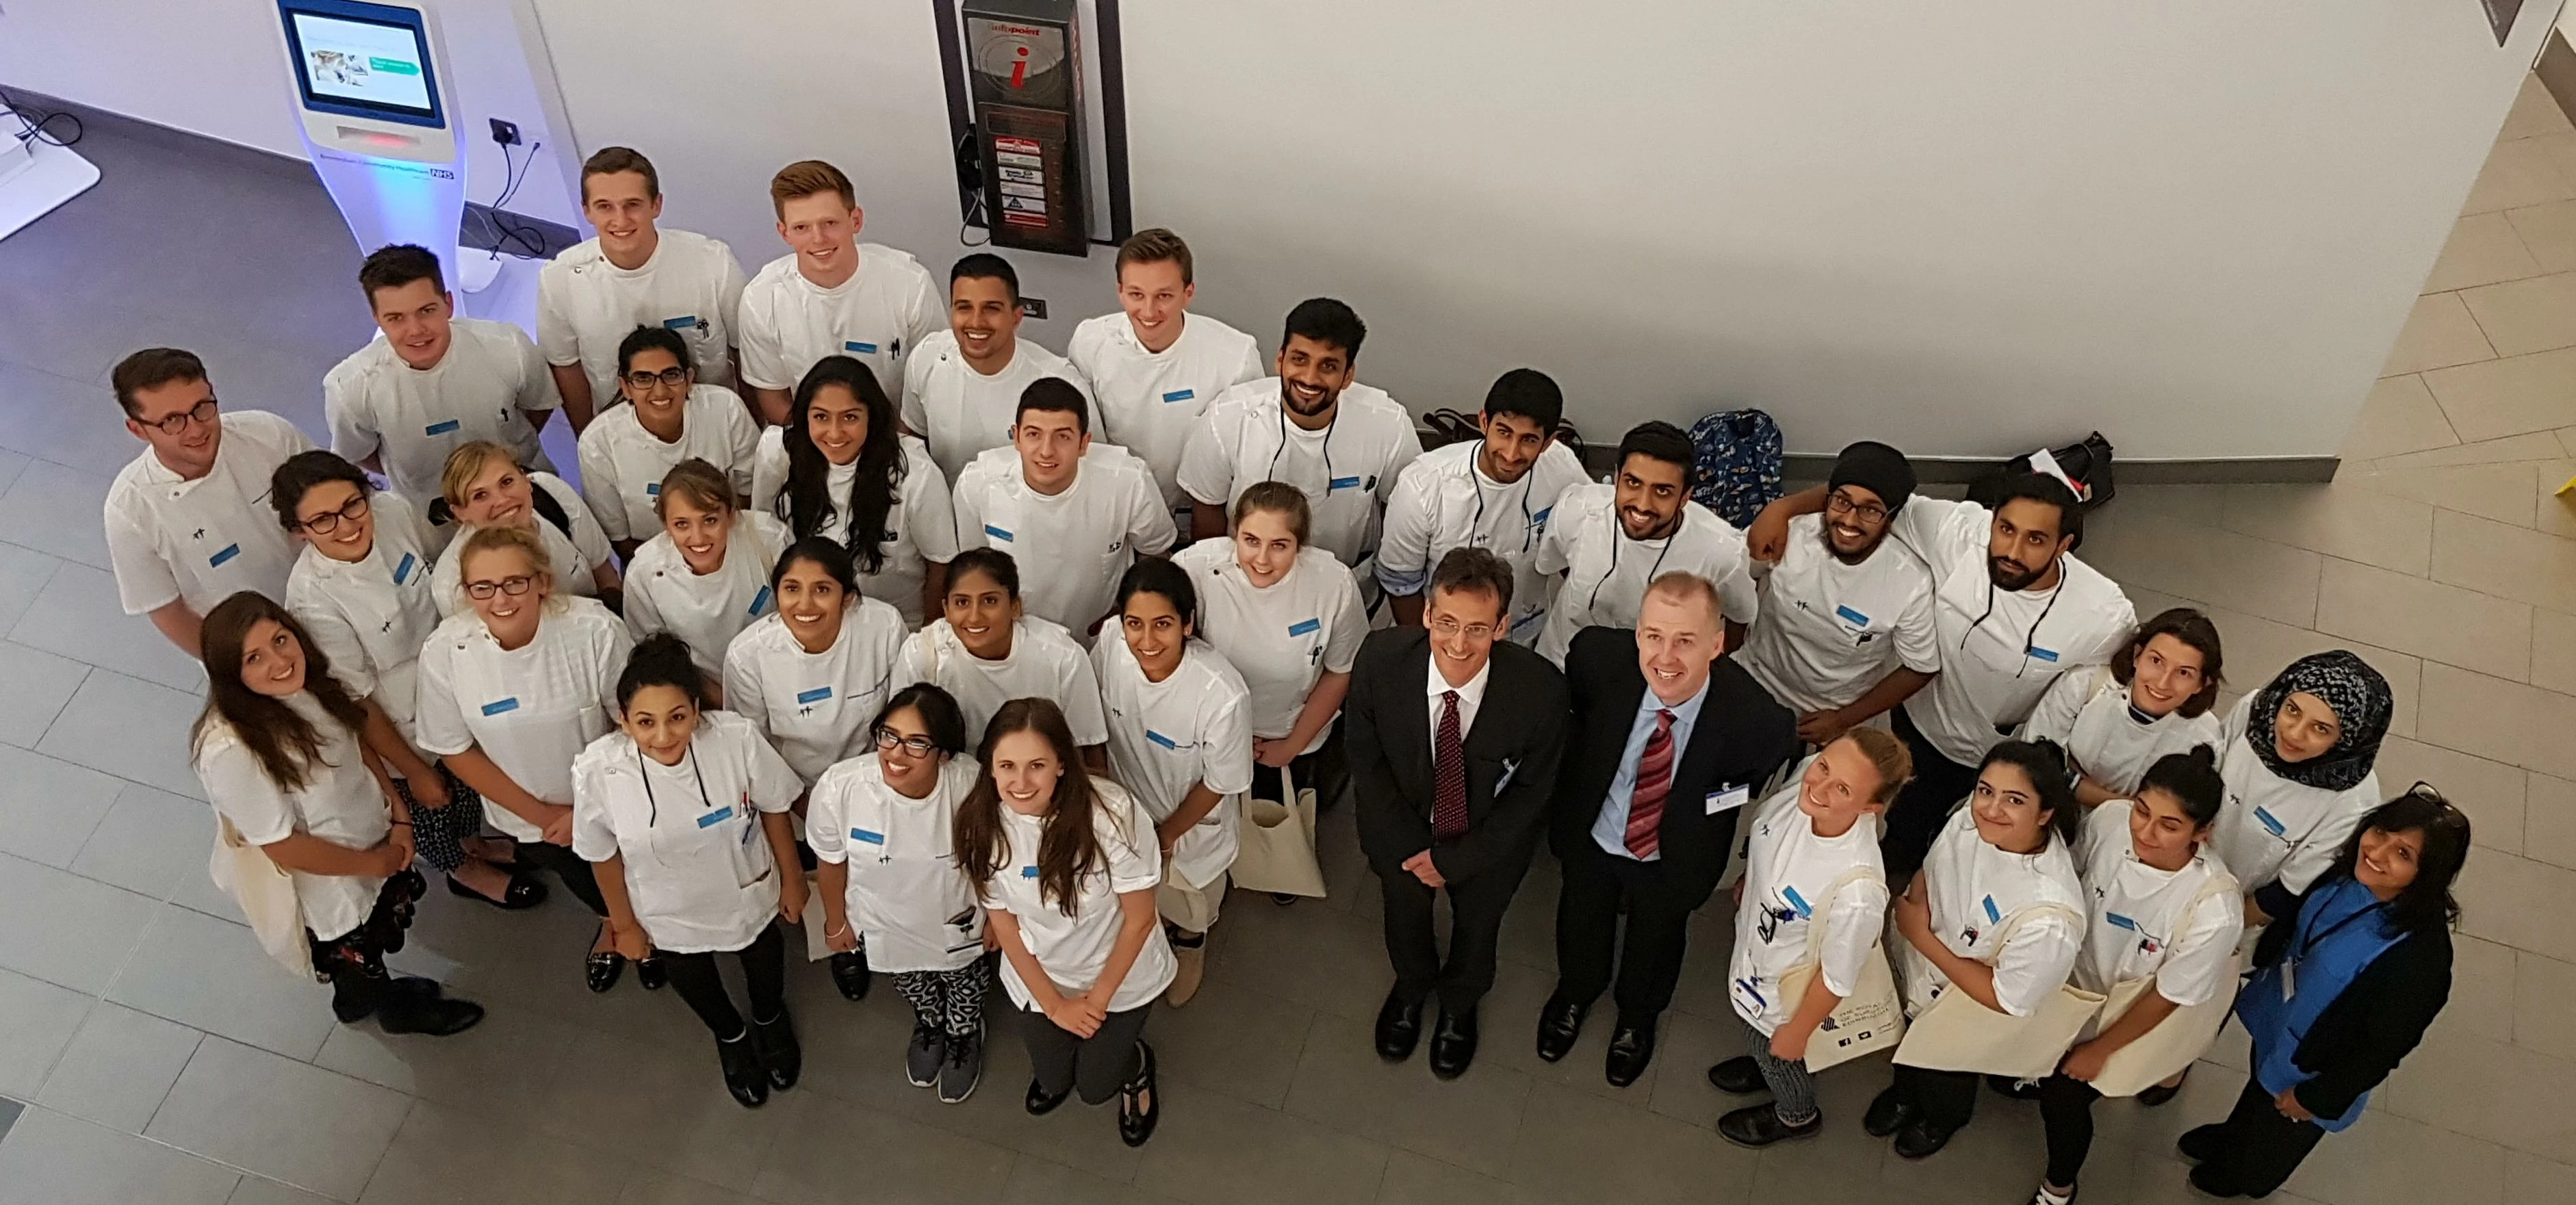 Eyes to the future with the Royal College of Surgeons of Edinburgh Dental Skills competition